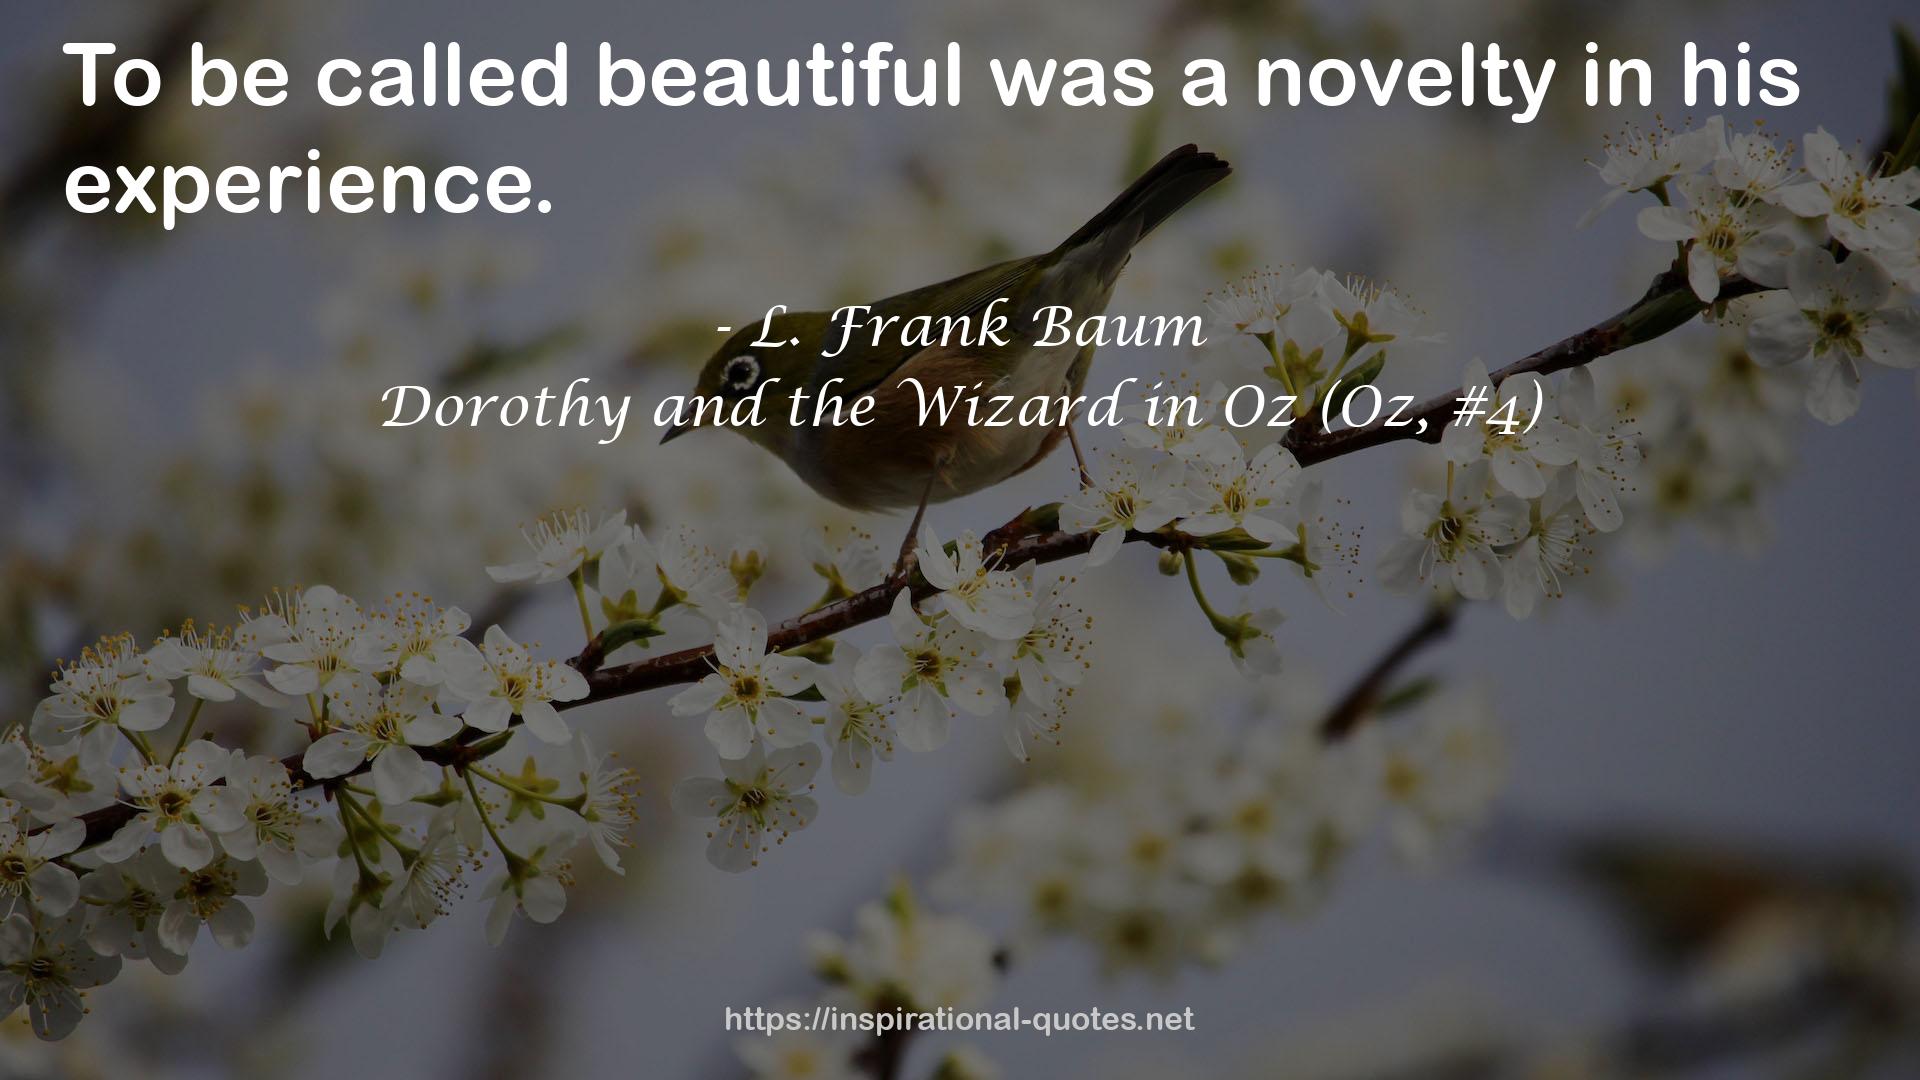 Dorothy and the Wizard in Oz (Oz, #4) QUOTES